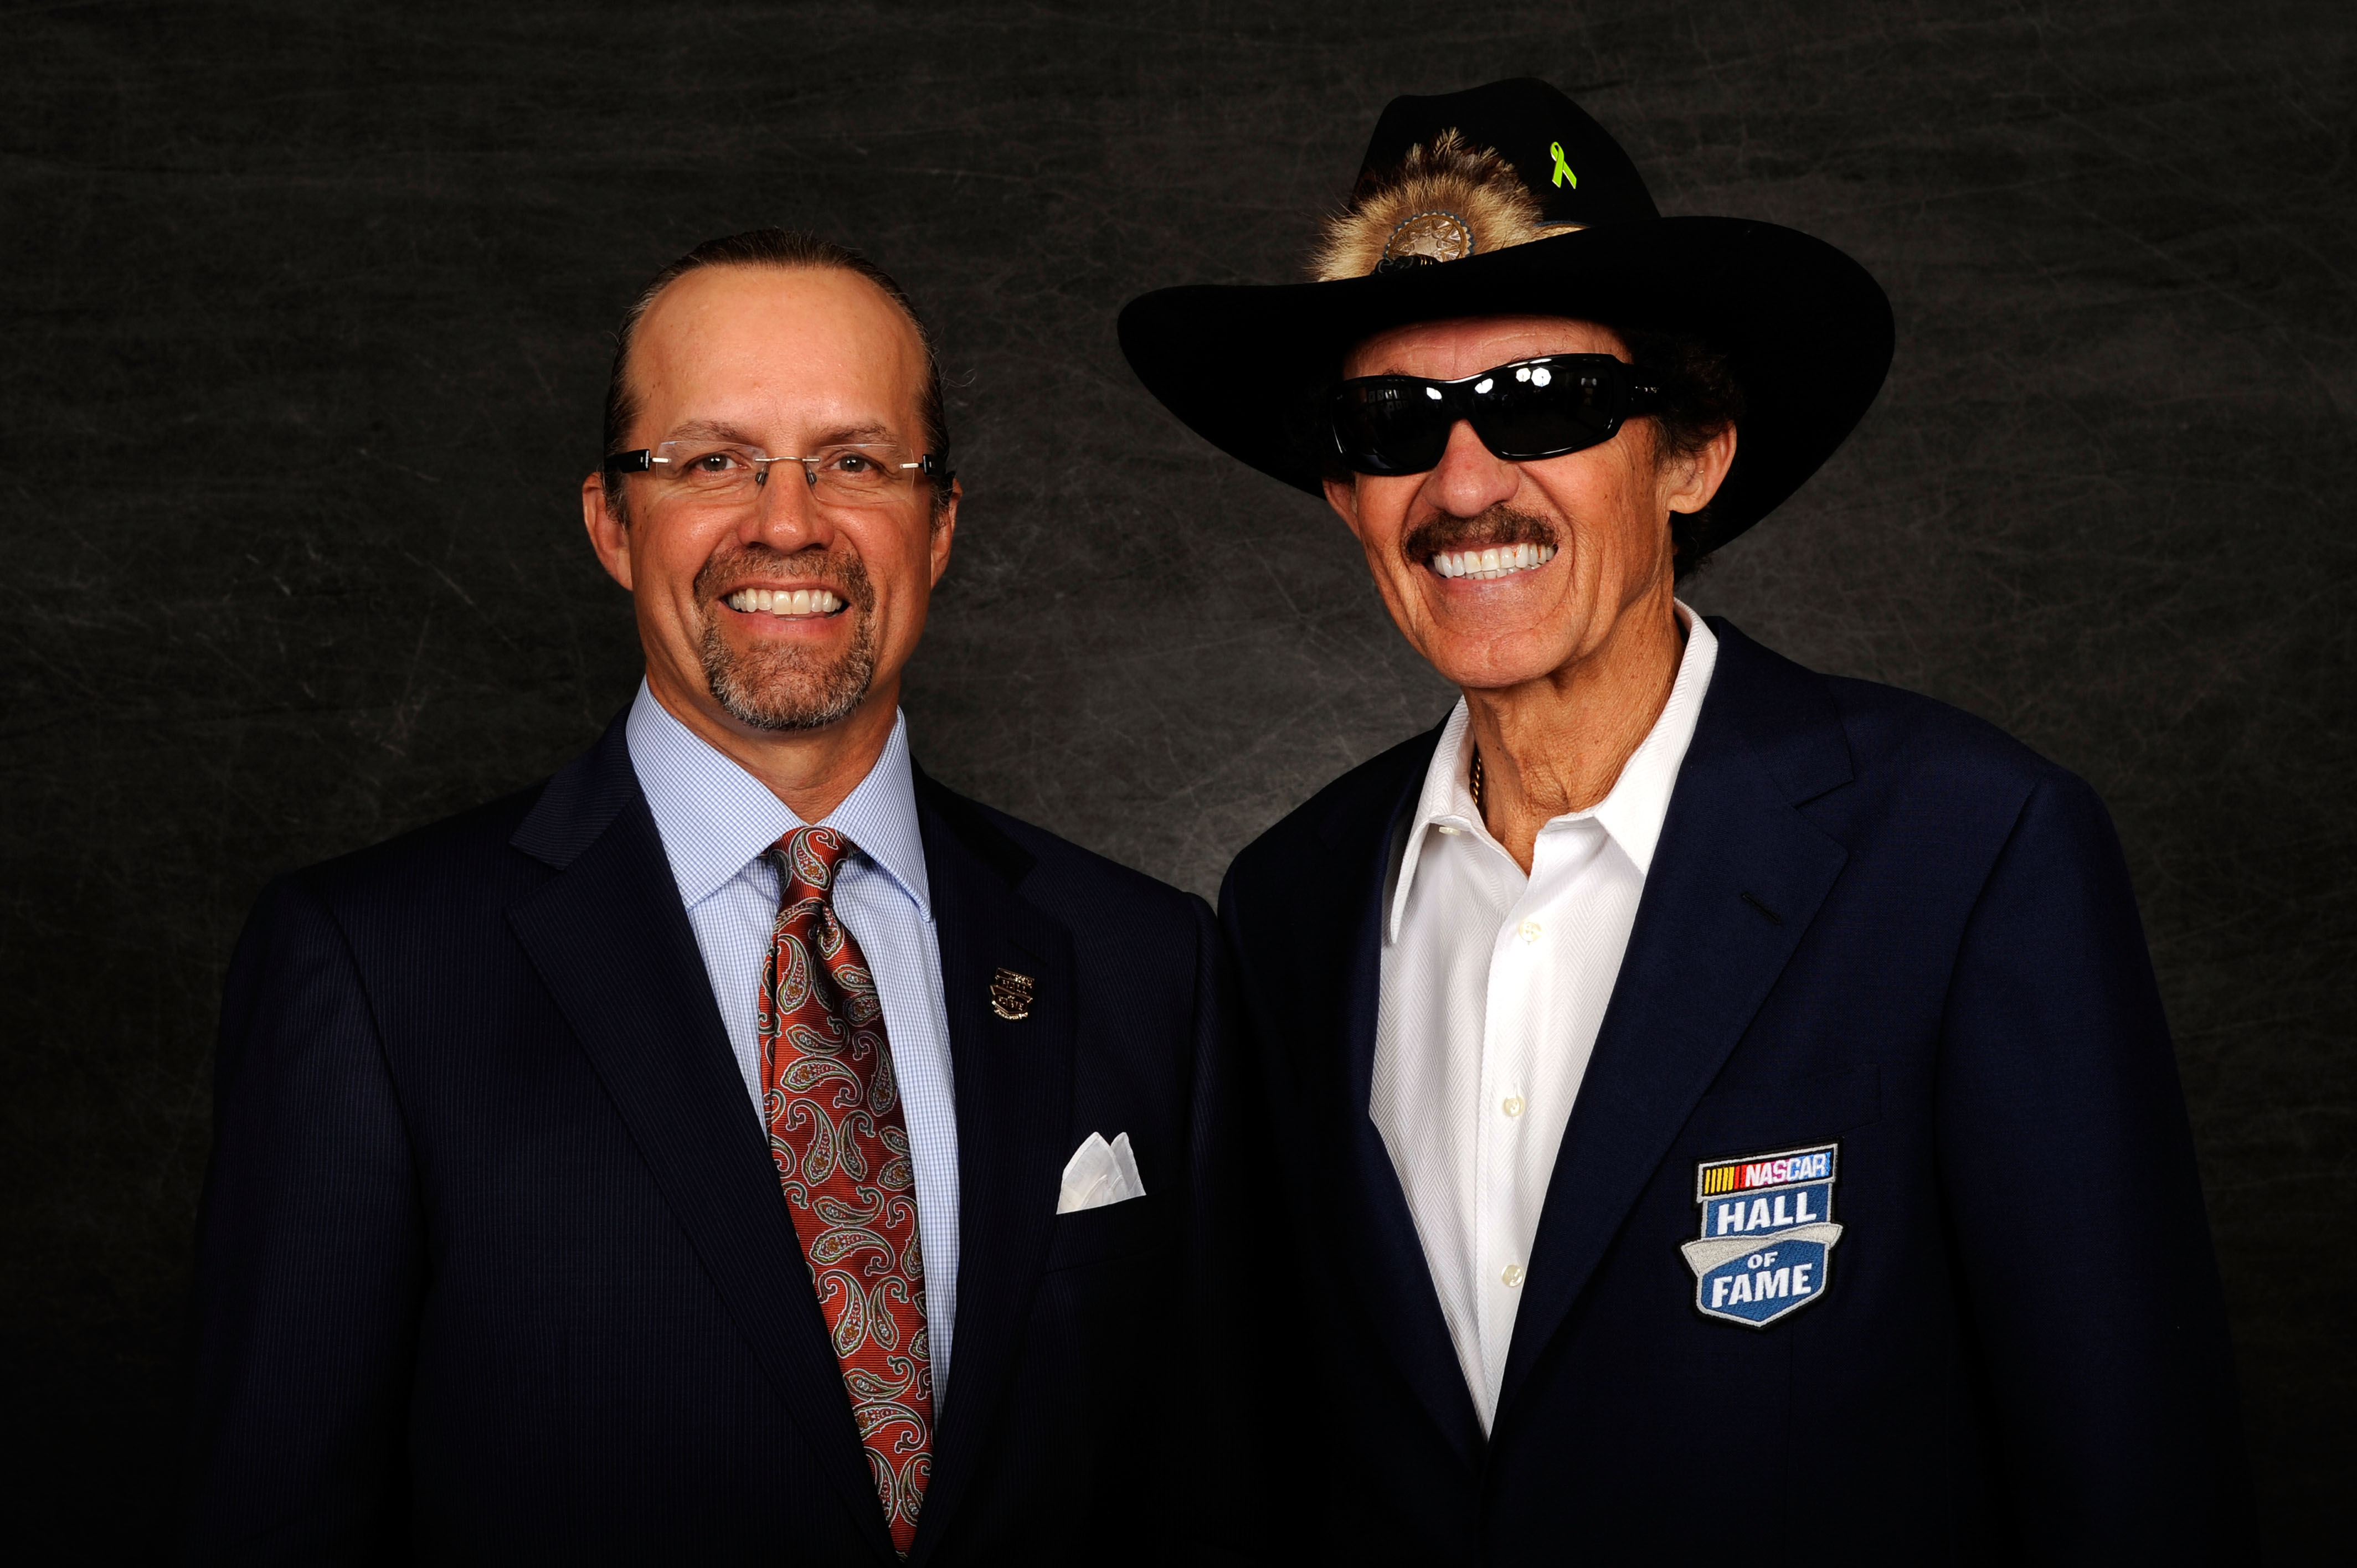 CHARLOTTE, NC - MAY 23:  Hall of Fame inductee Richard Petty (R) and his son Kyle Petty pose prior to the 2010 NASCAR Hall of Fame Induction Ceremony at The Ritz-Carlton on May 23, 2010 in Charlotte, North Carolina.  (Photo by Rusty Jarrett/Getty Images f